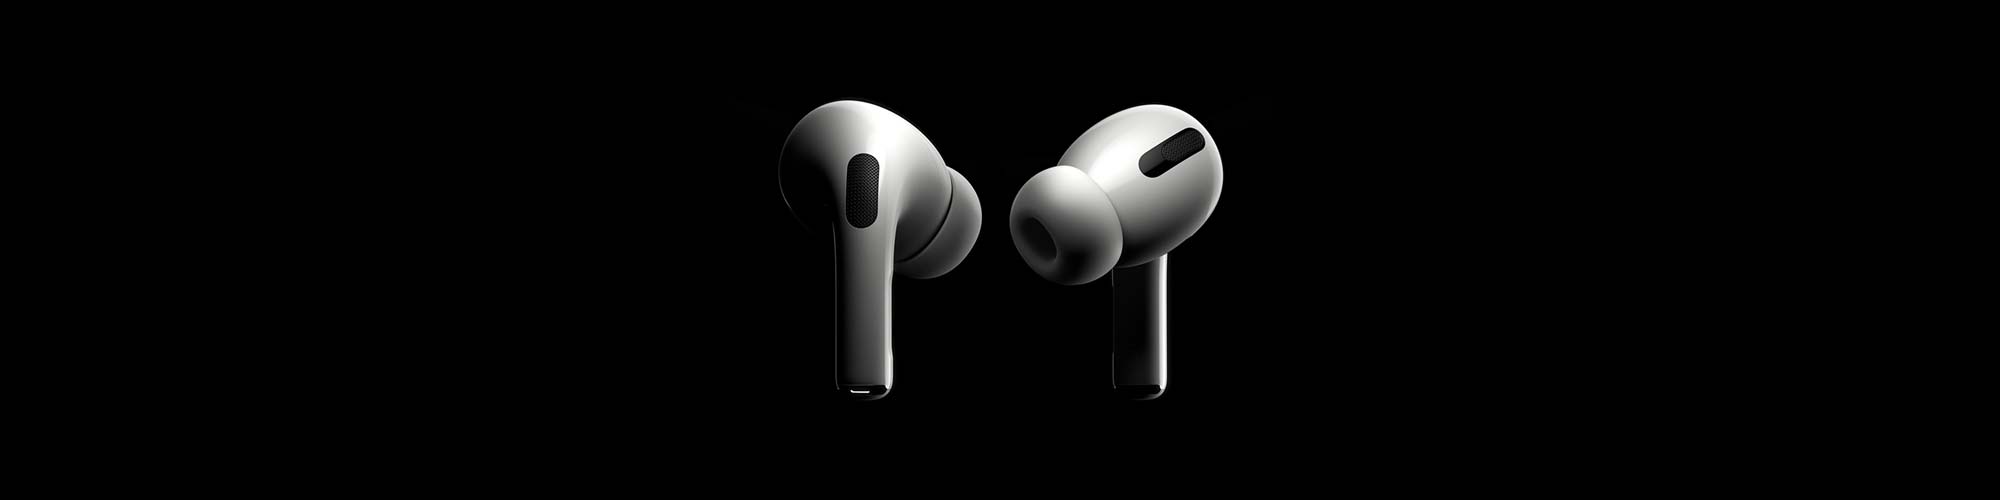       AirPods Pro        ANC